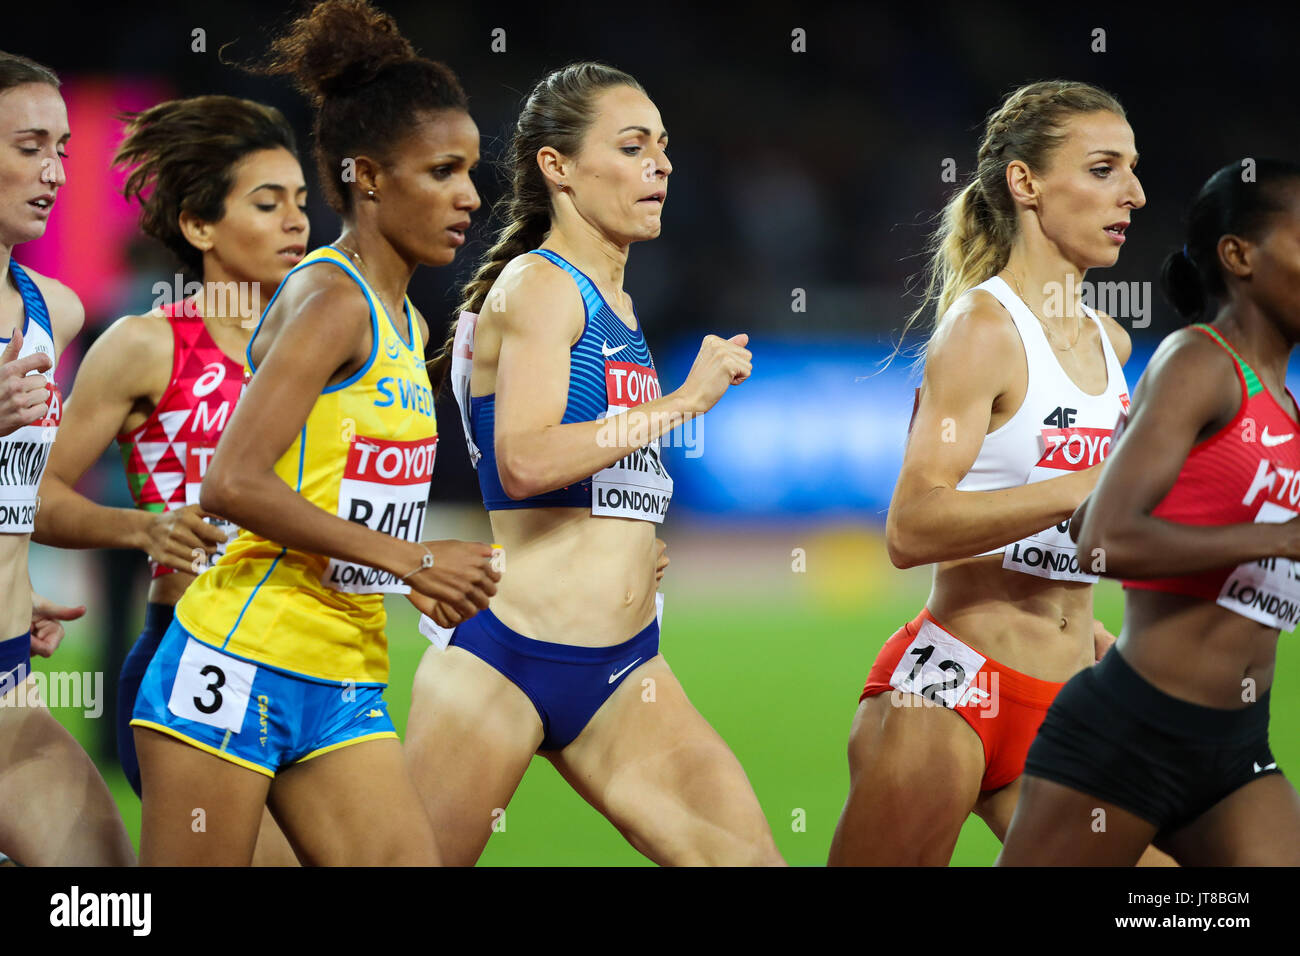 London, UK. 07th Aug, 2017. London, 2017 August 07. Eventual silver medalist Jennifer Simpson, USA, bides her time within the pack in the early stages of the women's 1,500m final on day four of the IAAF London 2017 world Championships at the London Stadium. Credit: Paul Davey/Alamy Live News Stock Photo